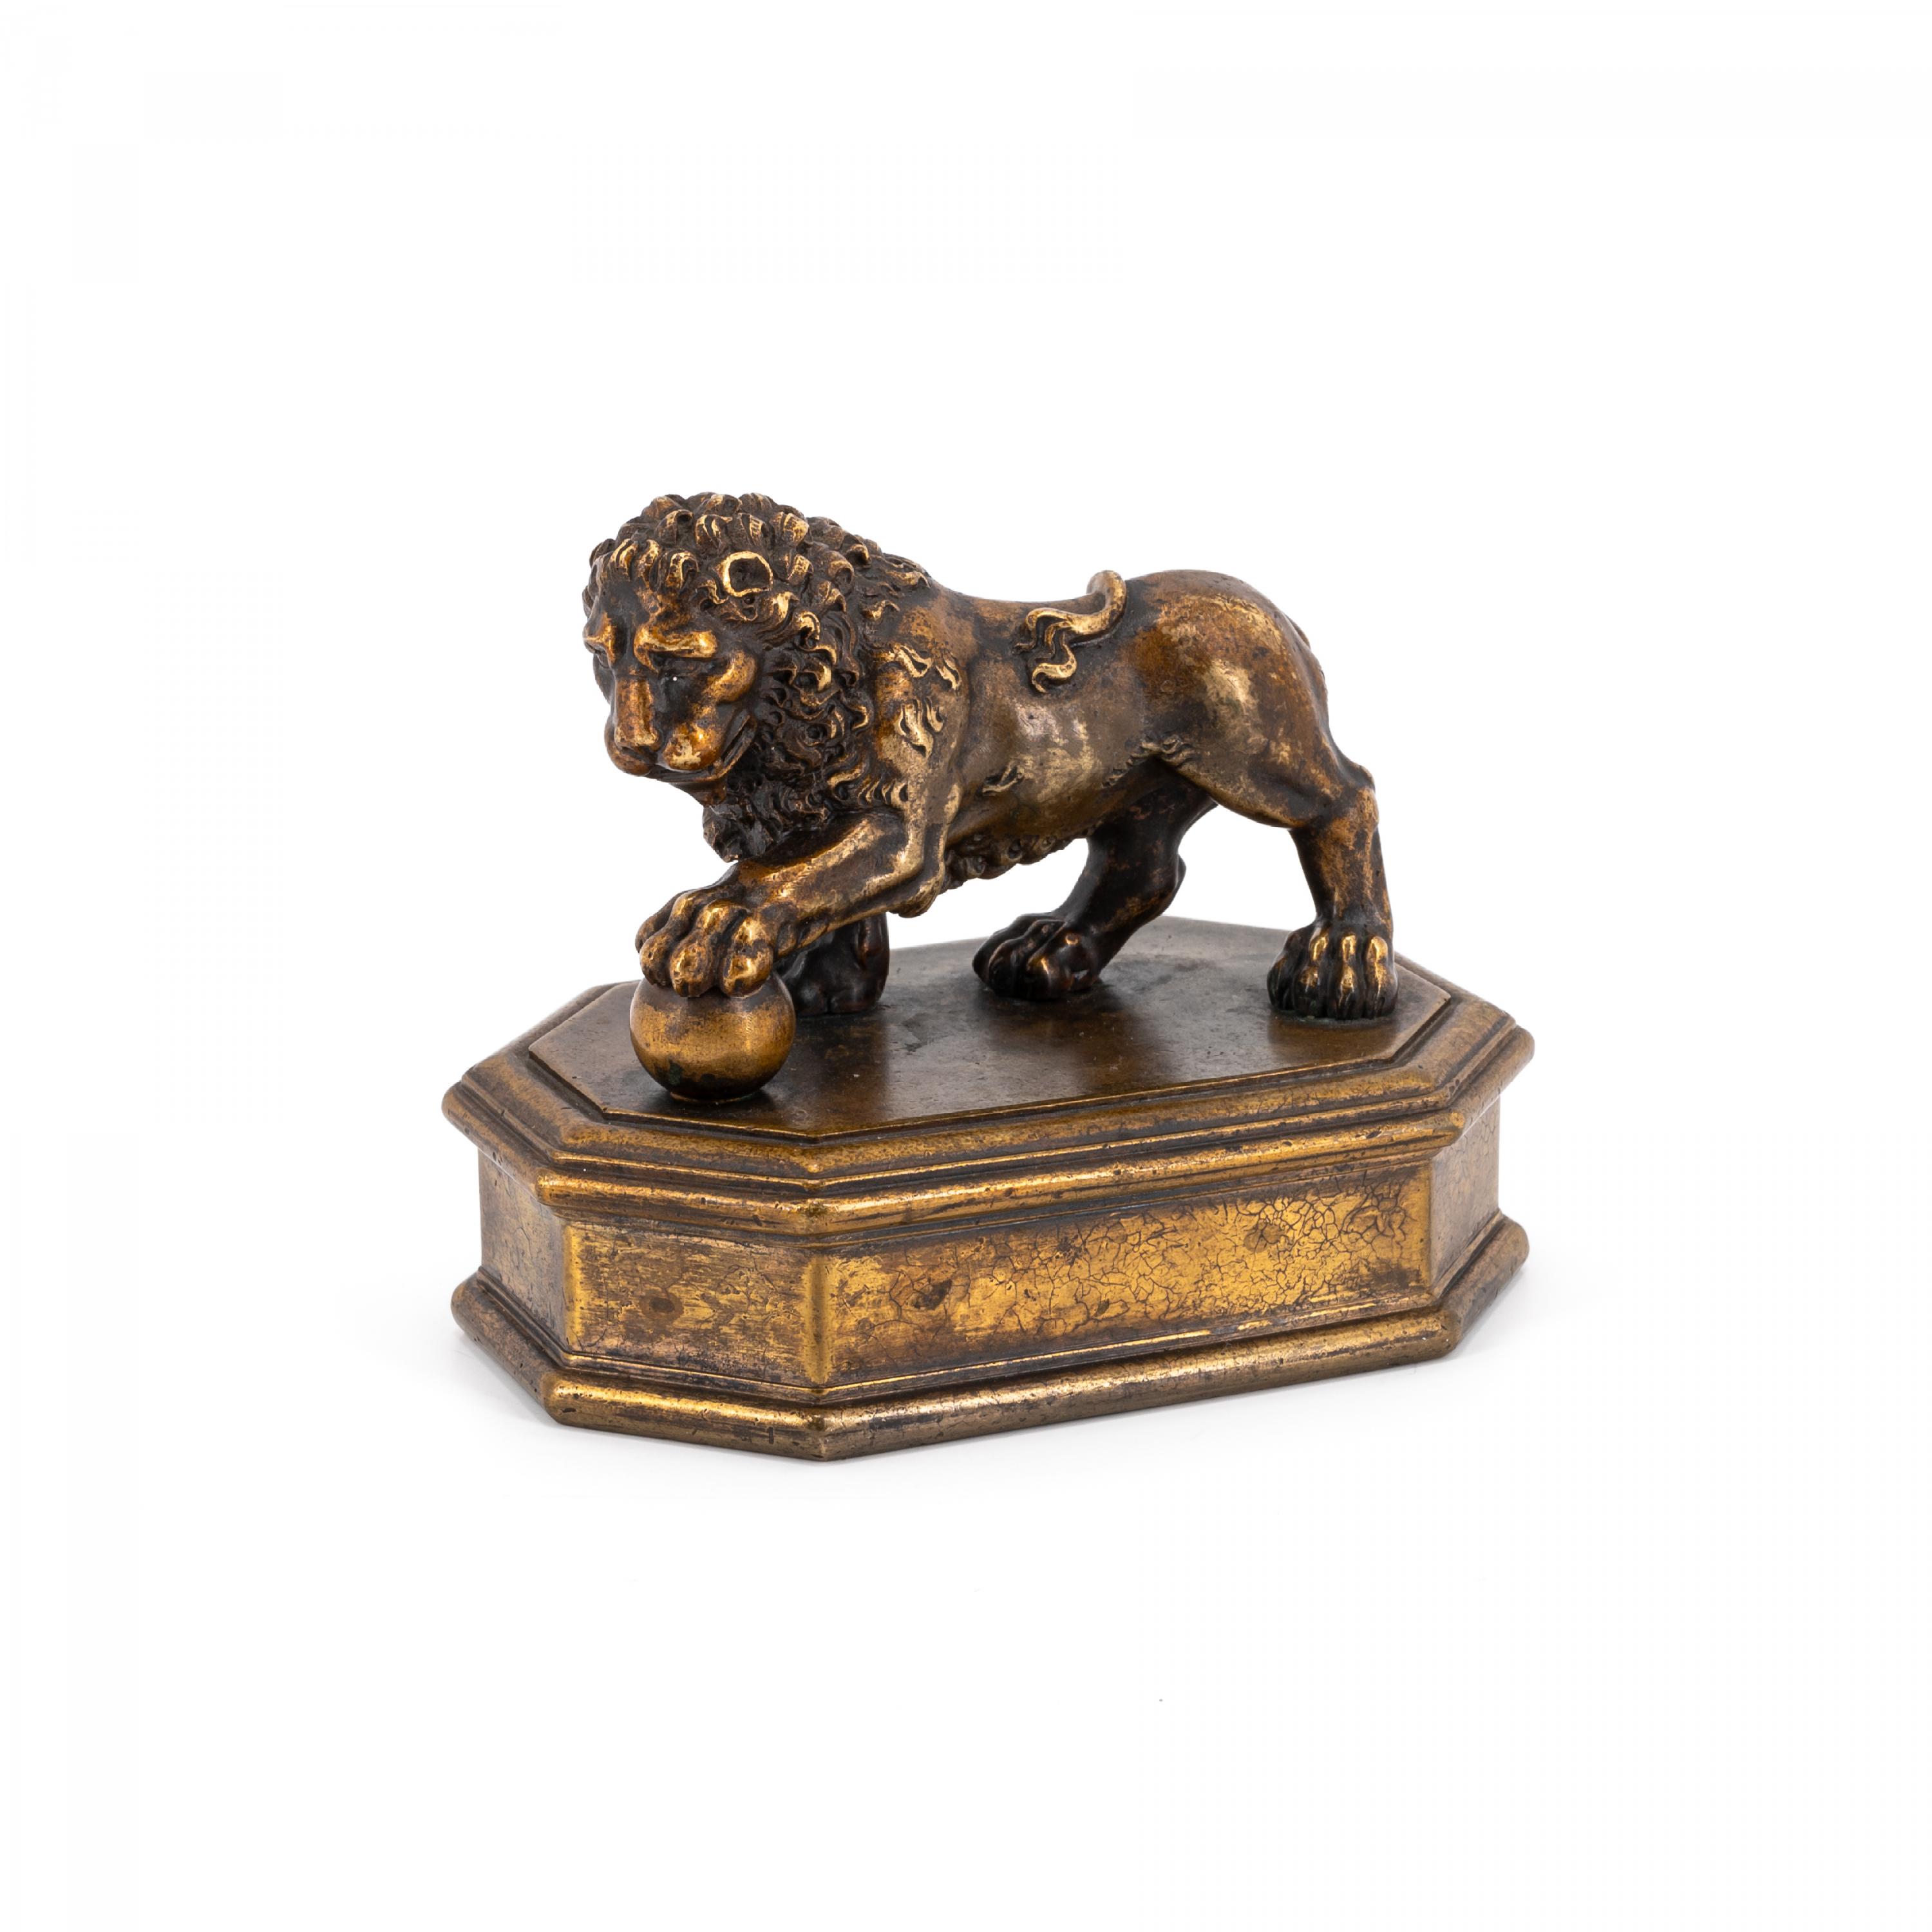 SMALL BRONZE SCULPTURE OF A LION ON A PEDESTAL - Image 2 of 6